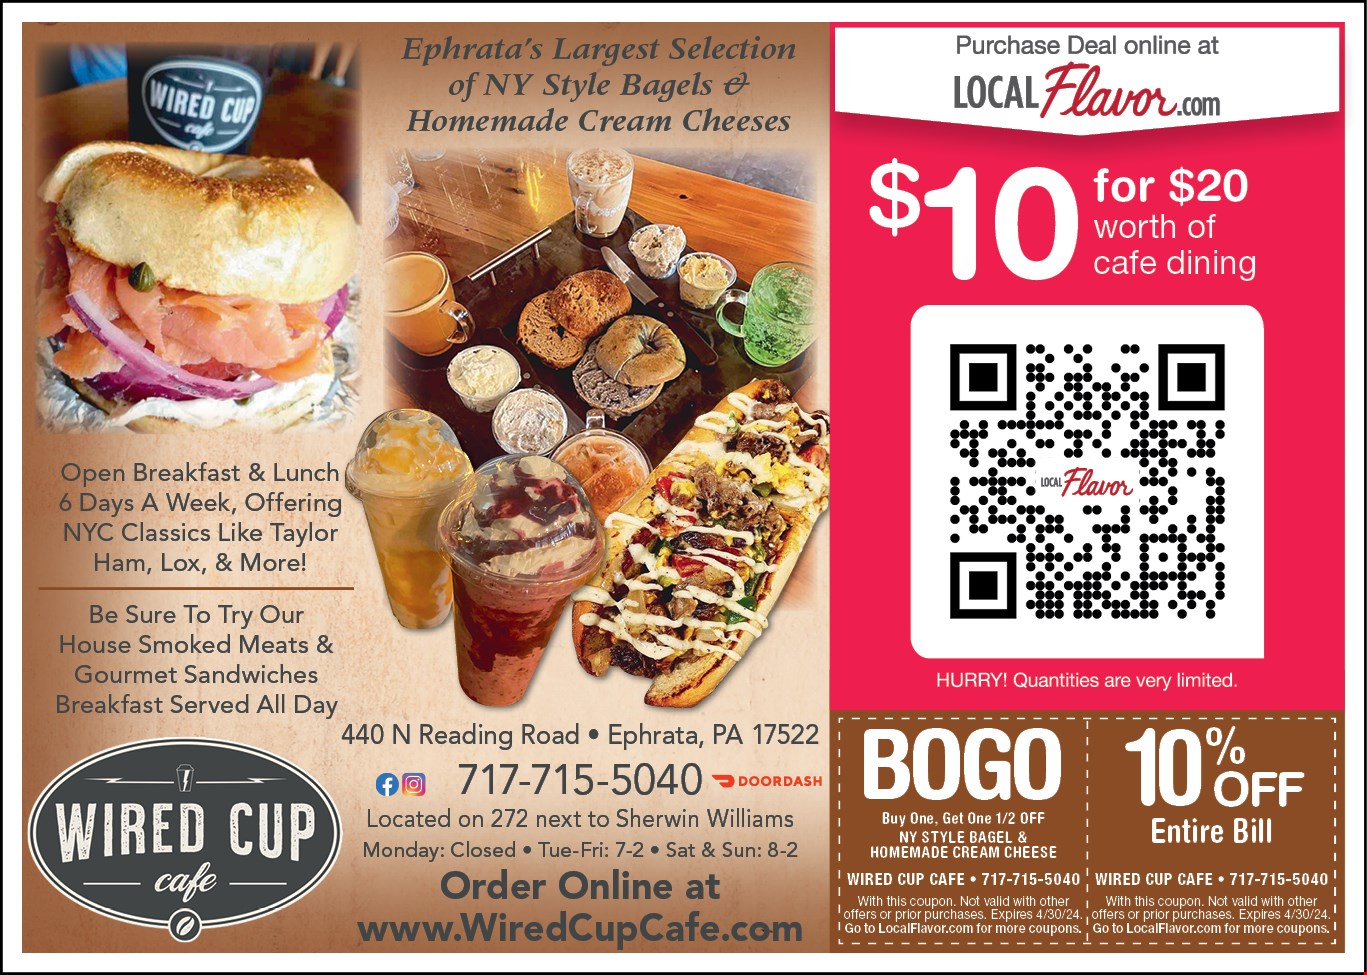 Wired Cup Cafe Coupons & Deals